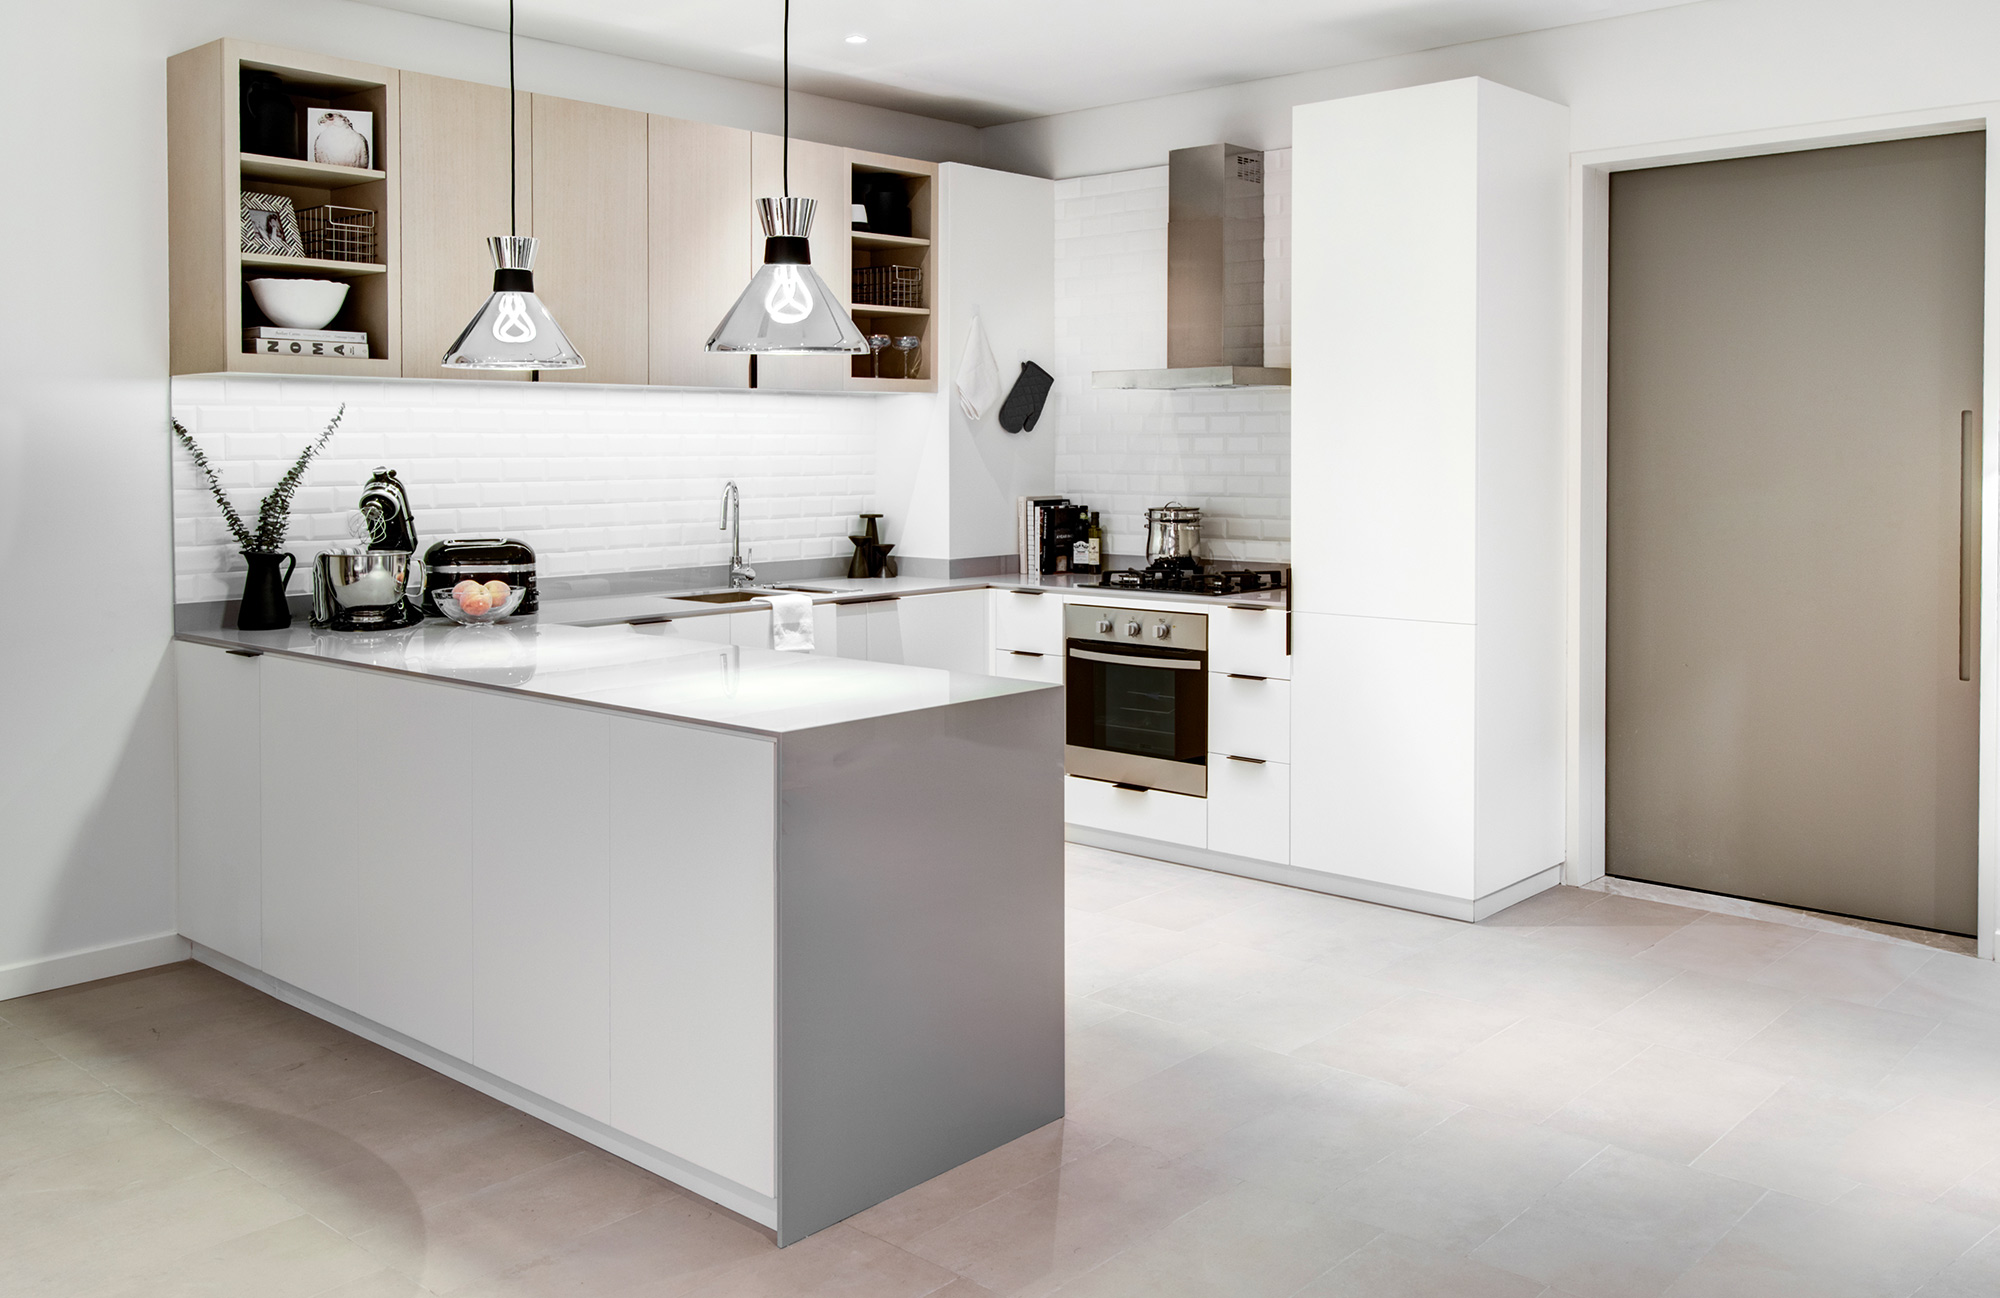 Image of Belgravia Heights I Show Apartment Kitchen in A bright, long-lasting kitchen worktop as the perfect backdrop for pictures - Cosentino